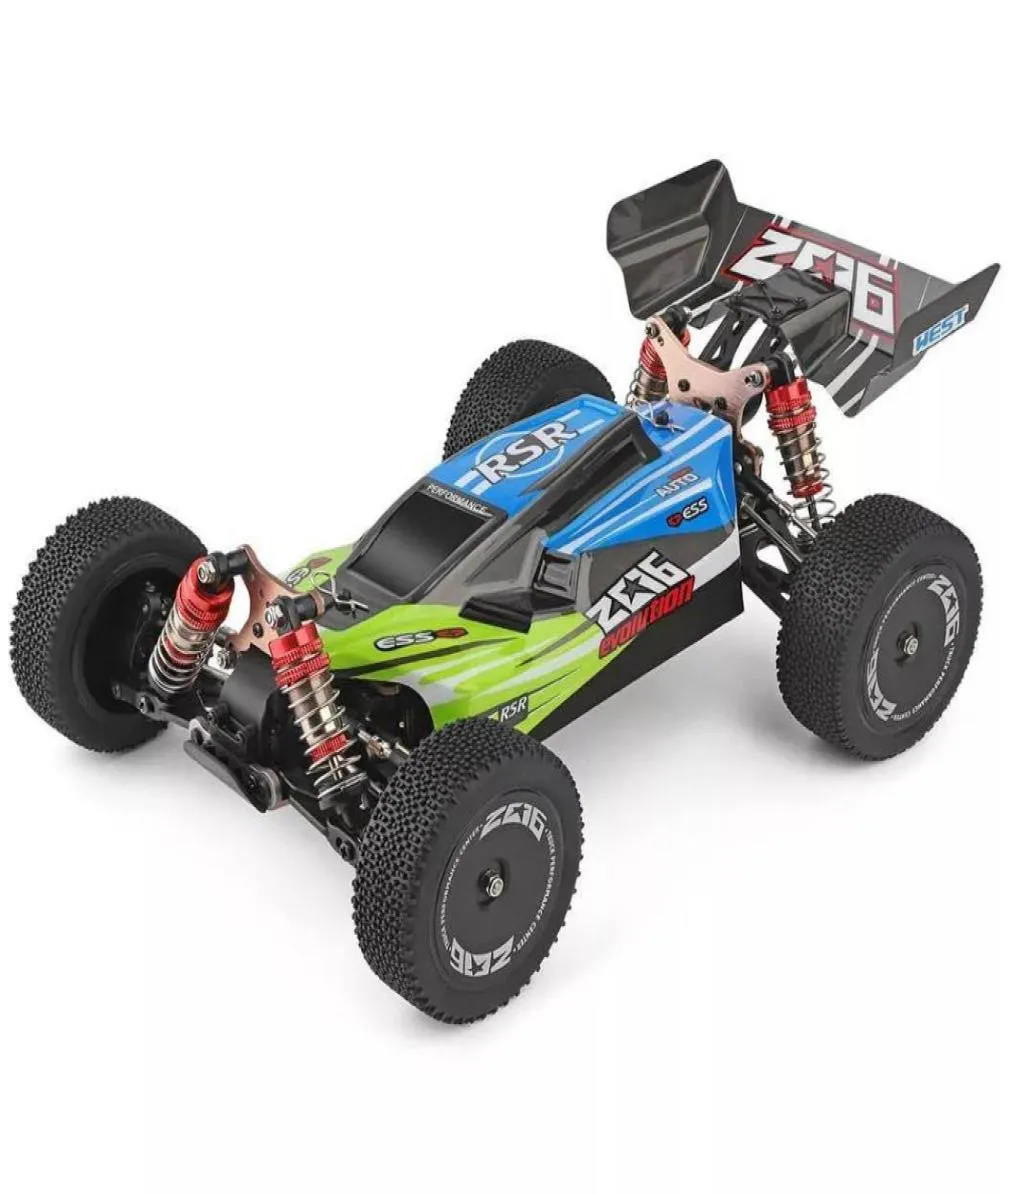 Wltoys 144001 114 24G Buggy 4WD High Speed ​​Vehicle Models 60KMH Racing 550 Motor RC Offroad Car RTR Y2003175243474